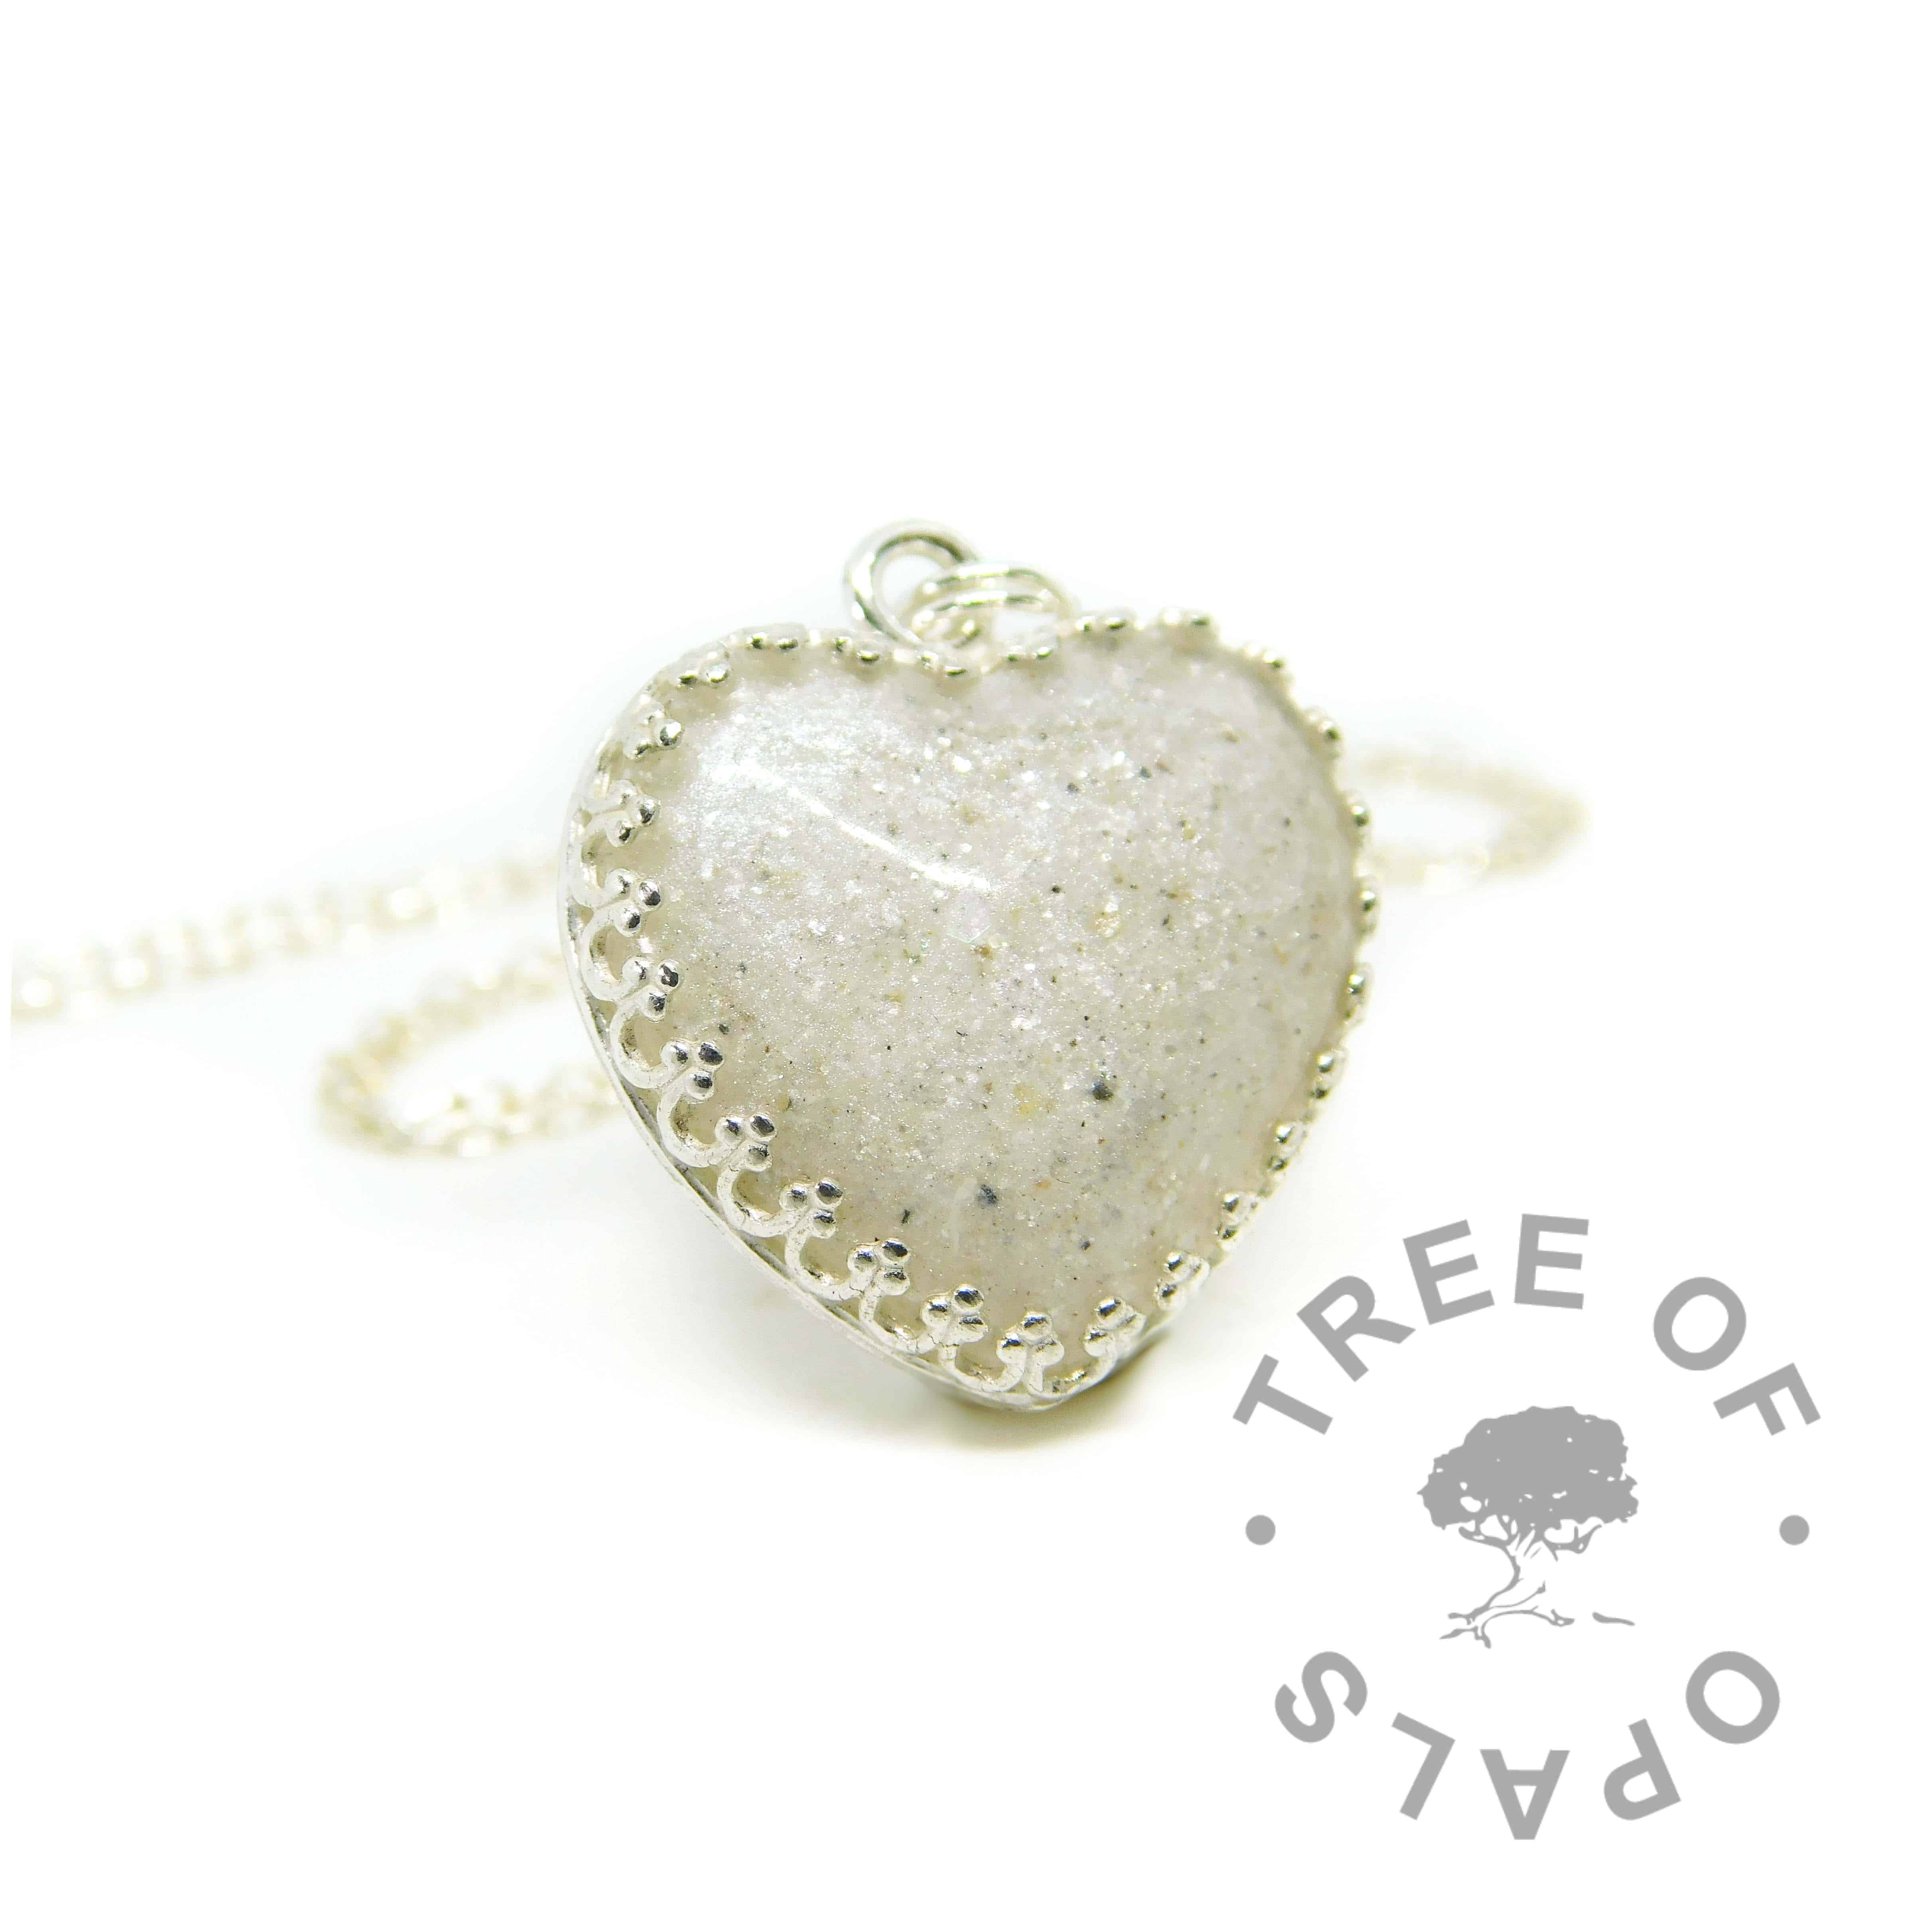 Cremation ashes with crystal clear resin, set in an 18mm heart cabochon with unicorn white resin sparkle mix, in a solid sterling silver crown setting. Shown on standard chain. Watermarked copyright image by Tree of Opals